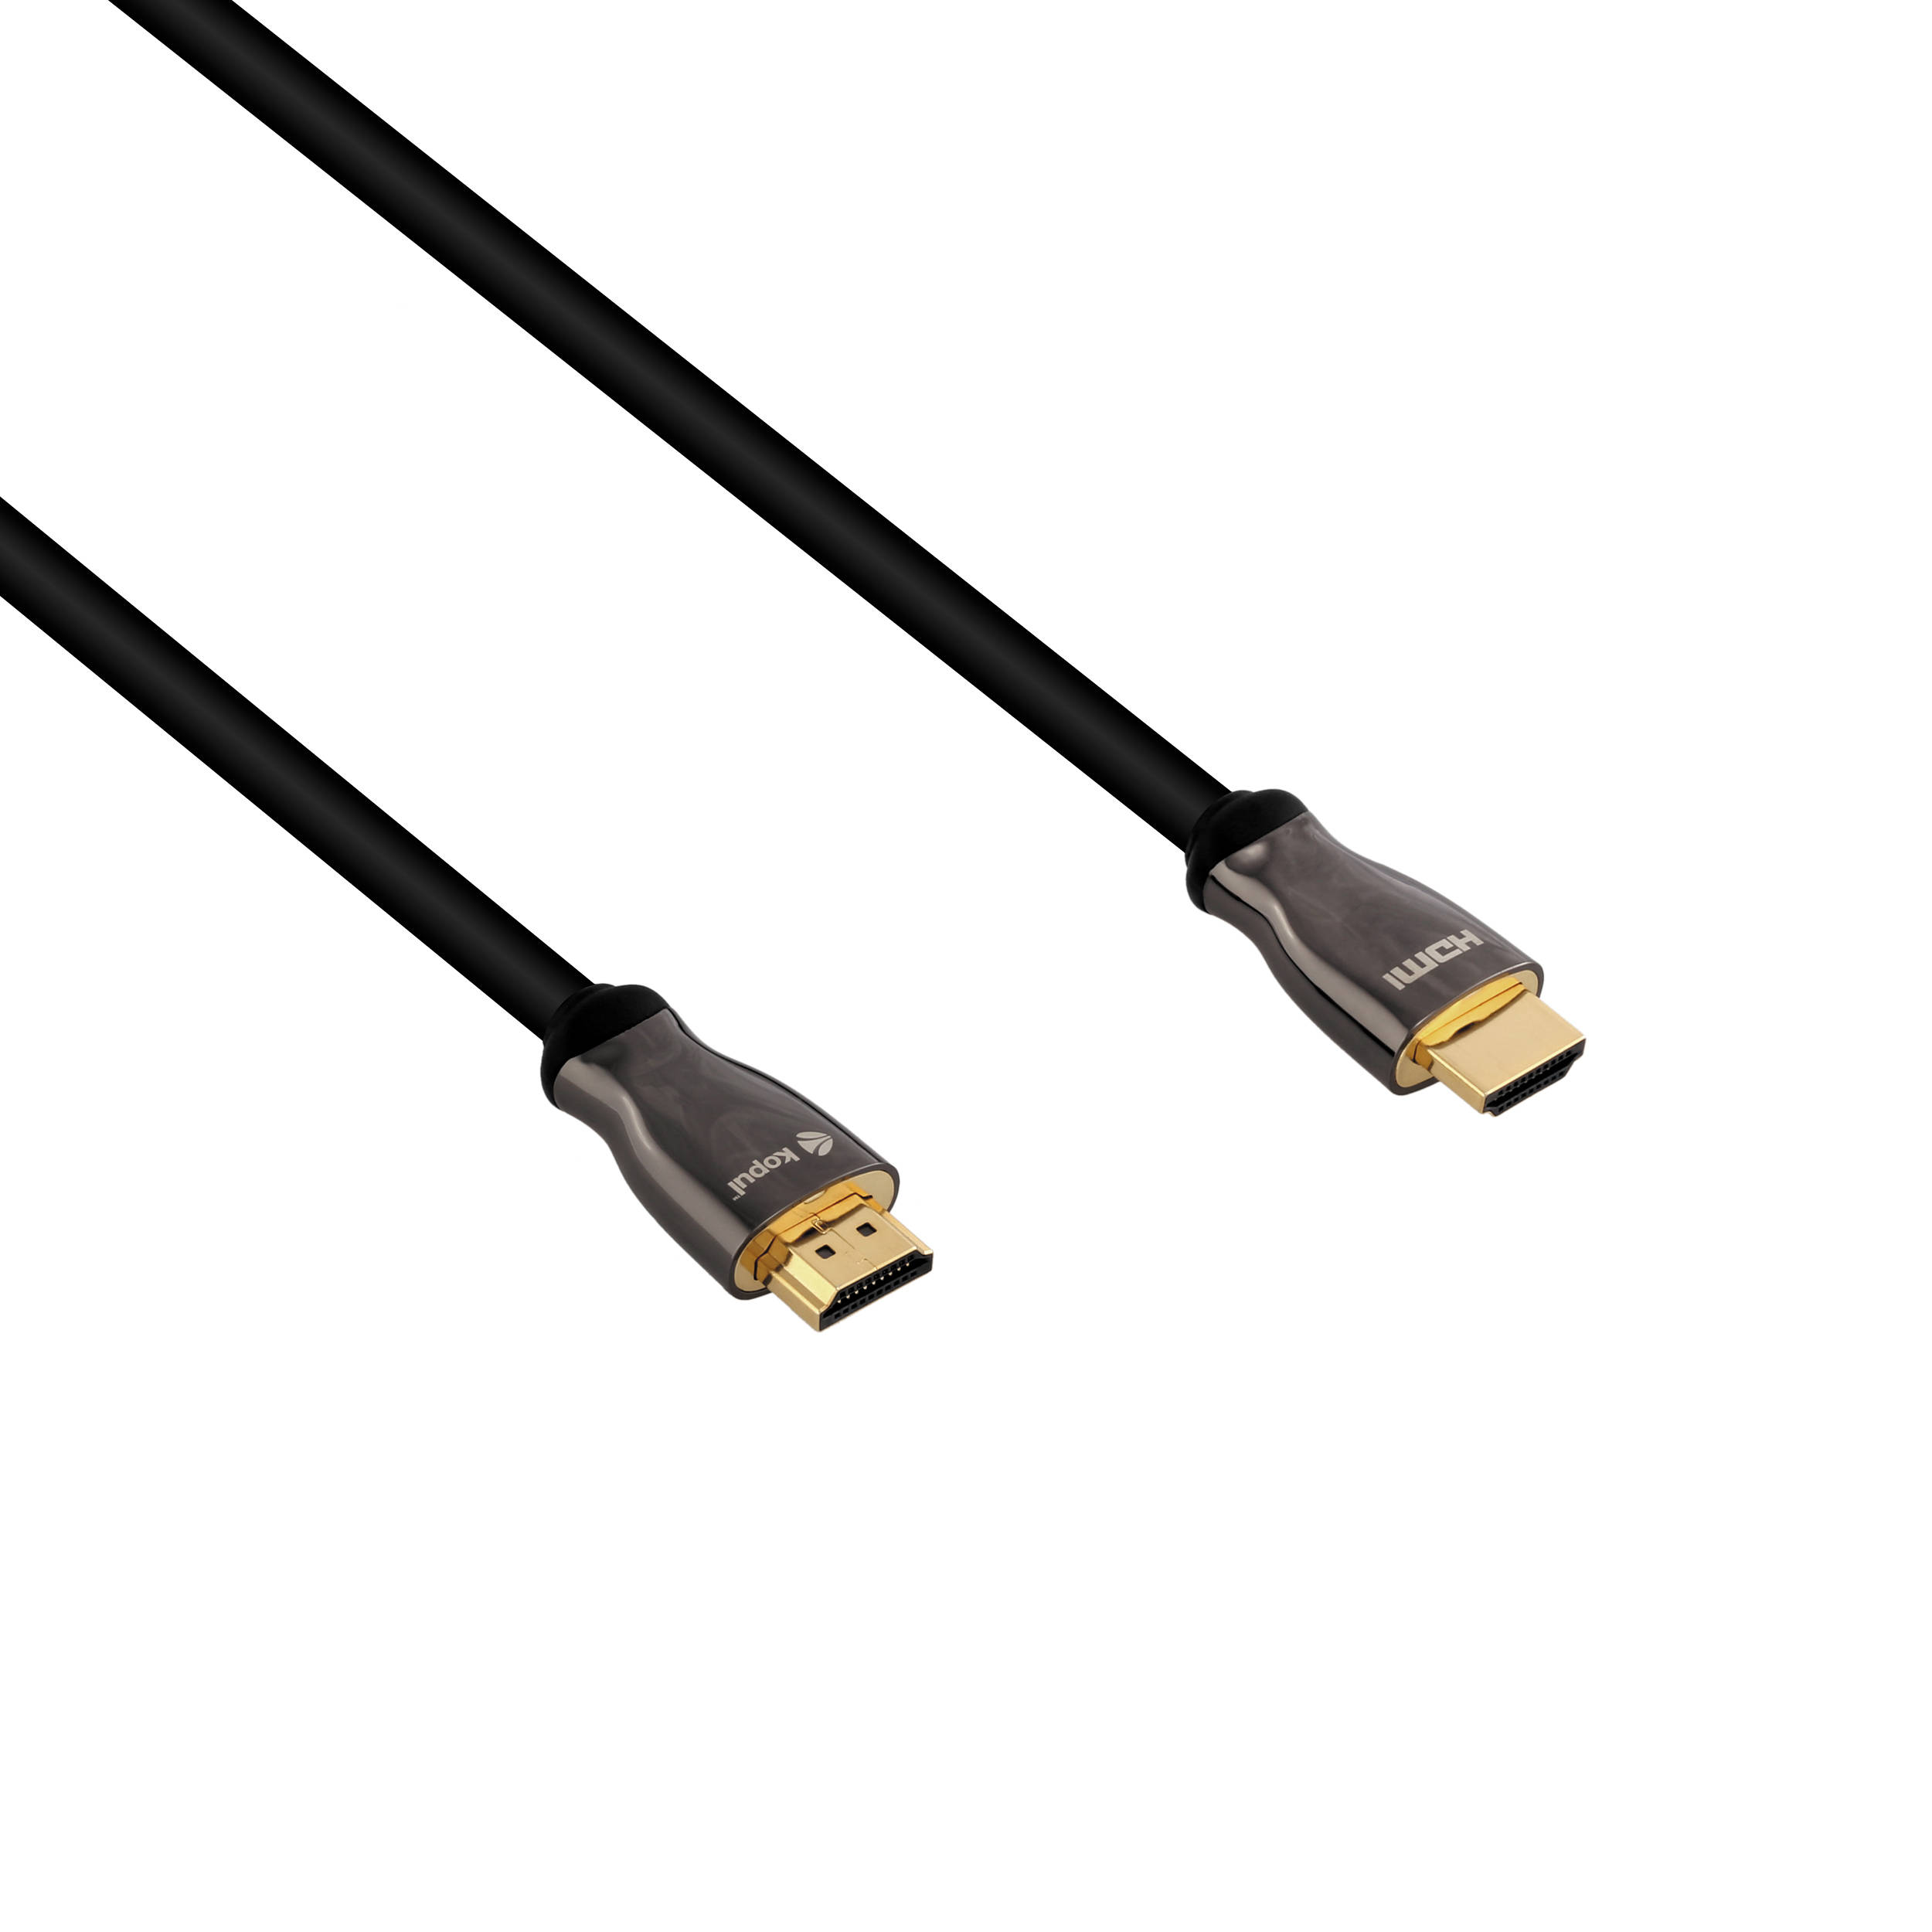 Kopul Hda 515 Premium High Speed Hdmi Cable With Ethernet